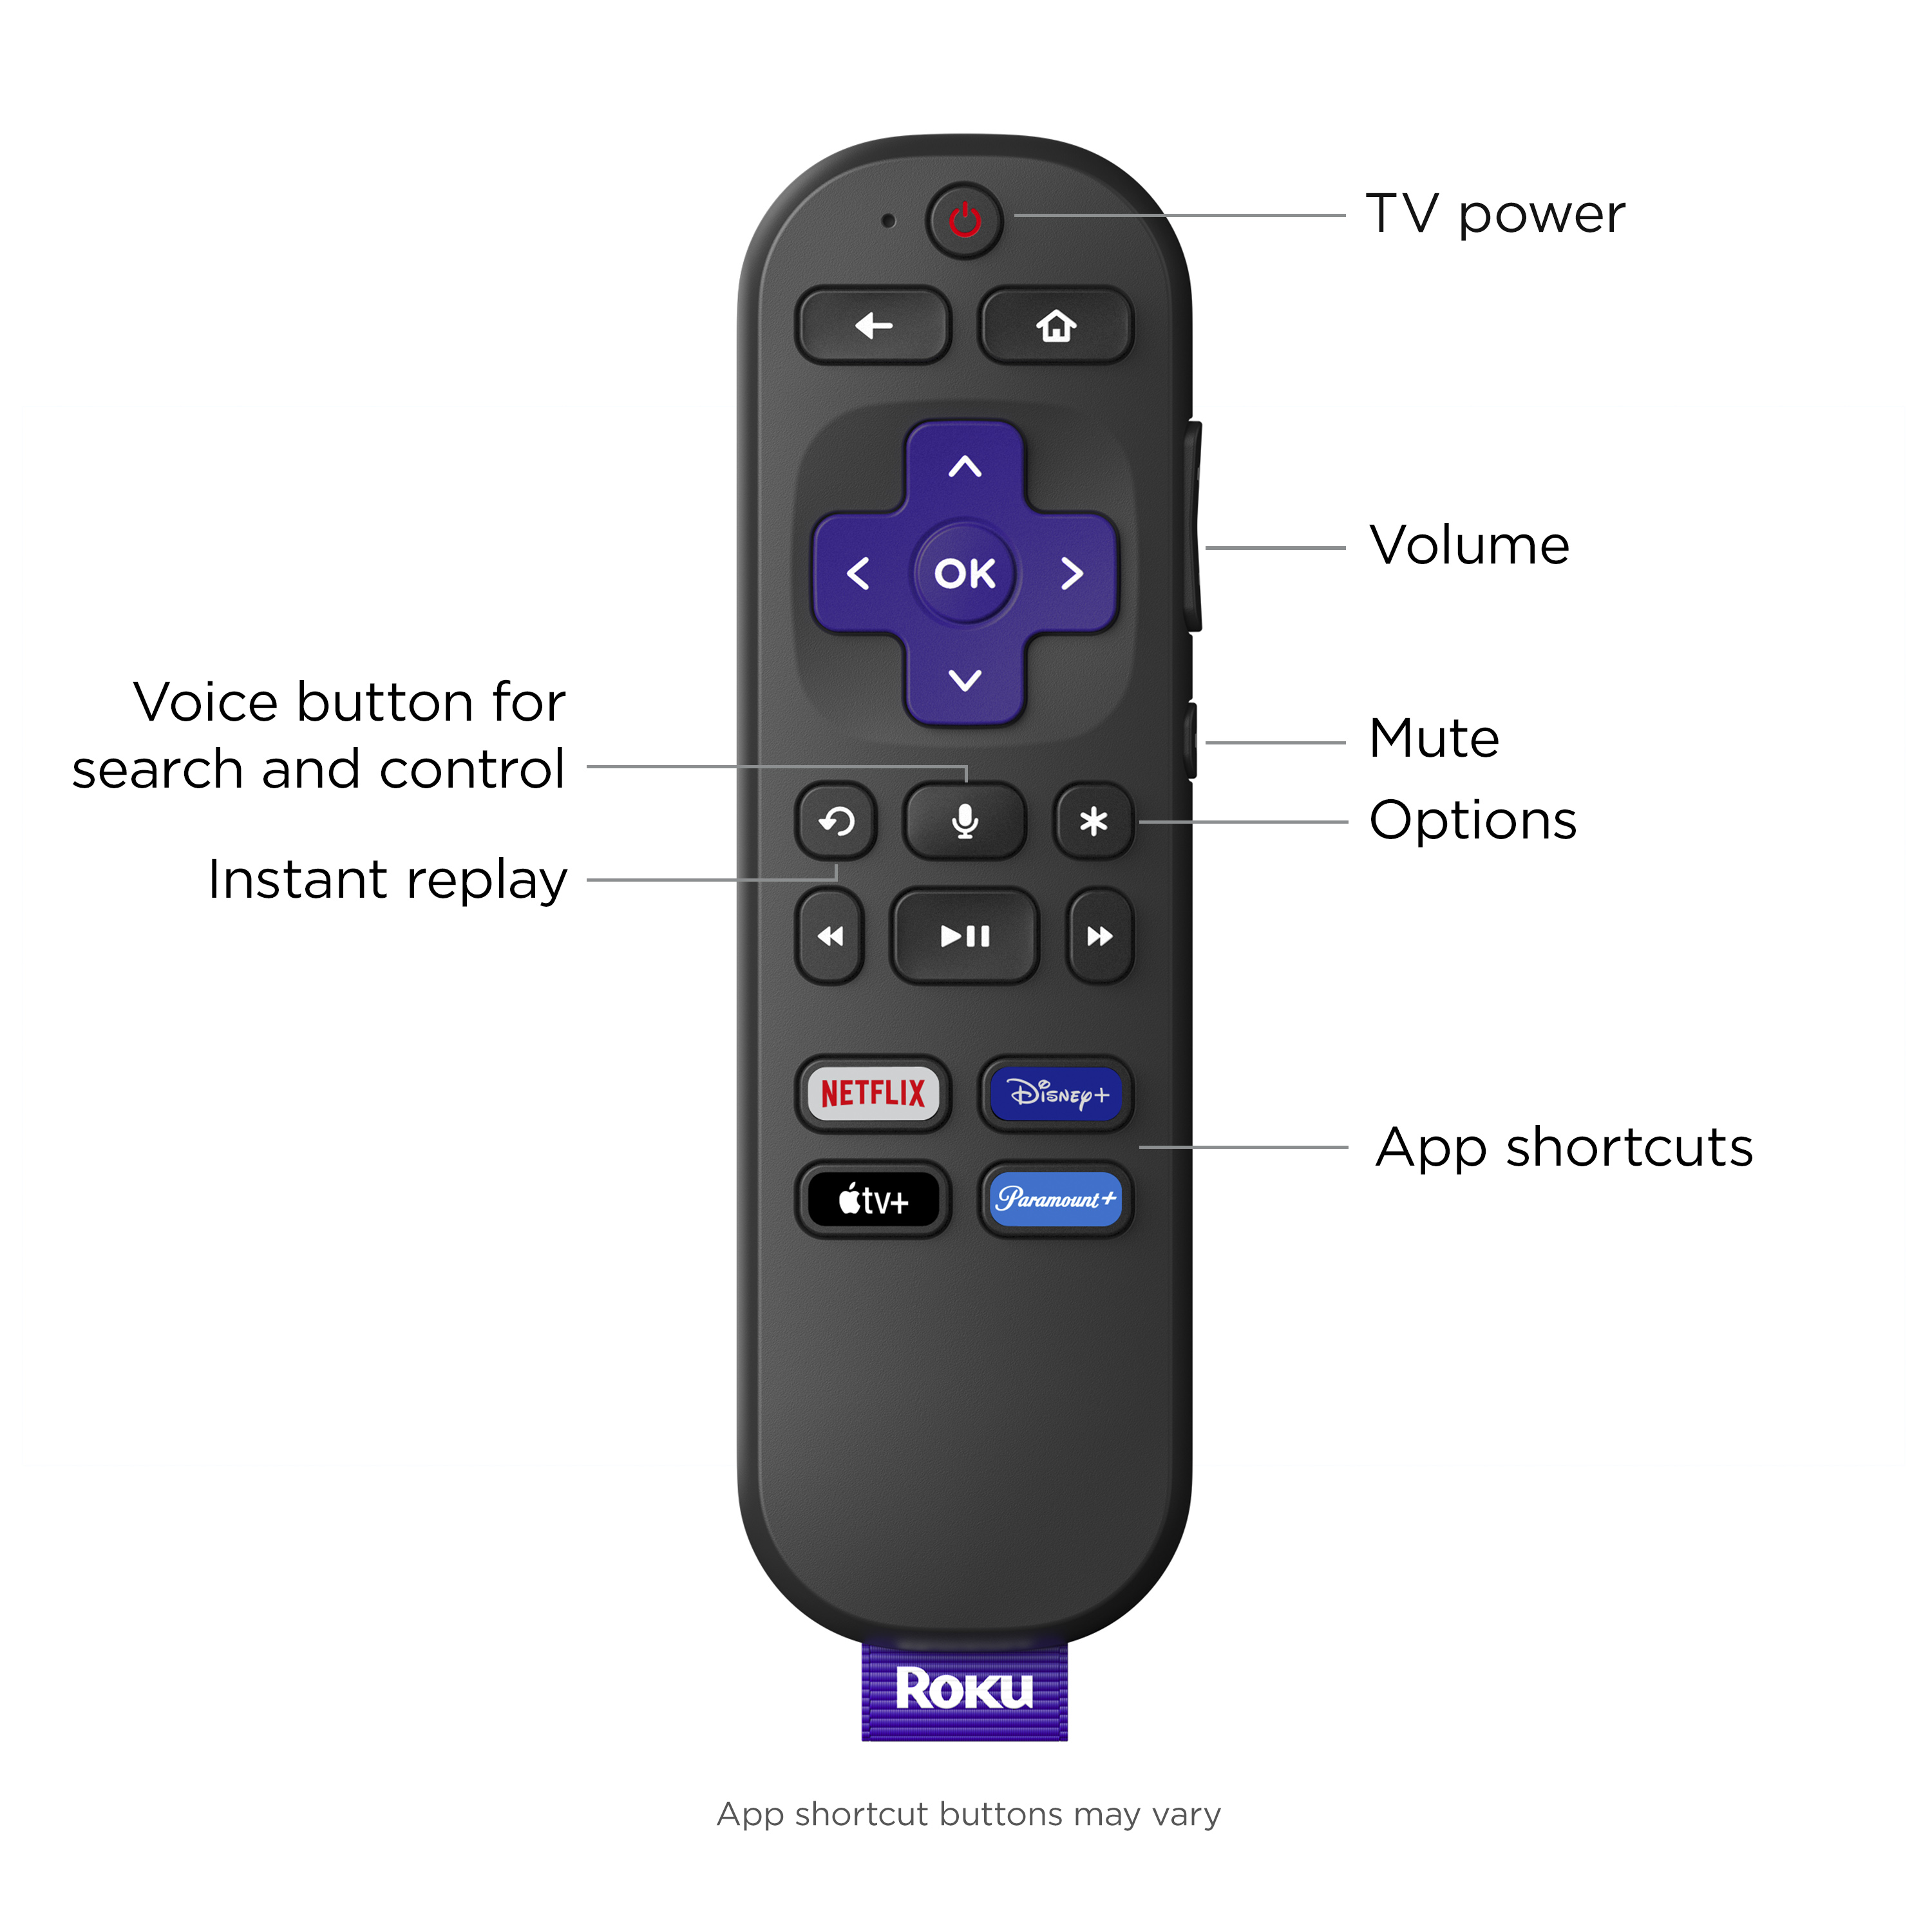 Roku Streaming Stick 4K review: The new best streaming device